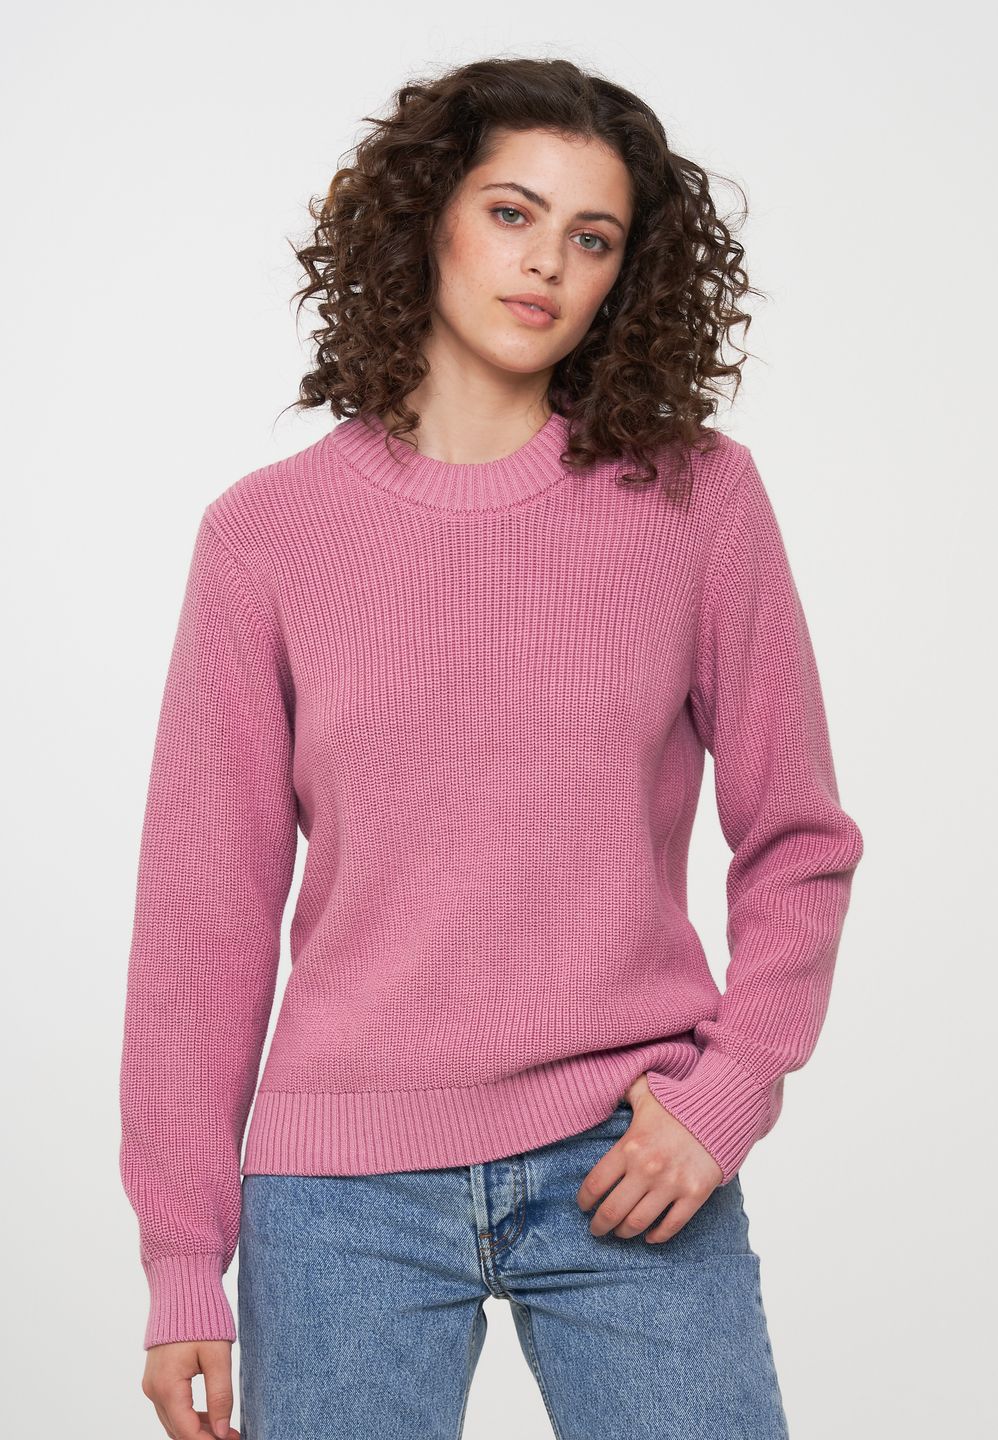 Pullover Macrozamia orchid rose von recolution